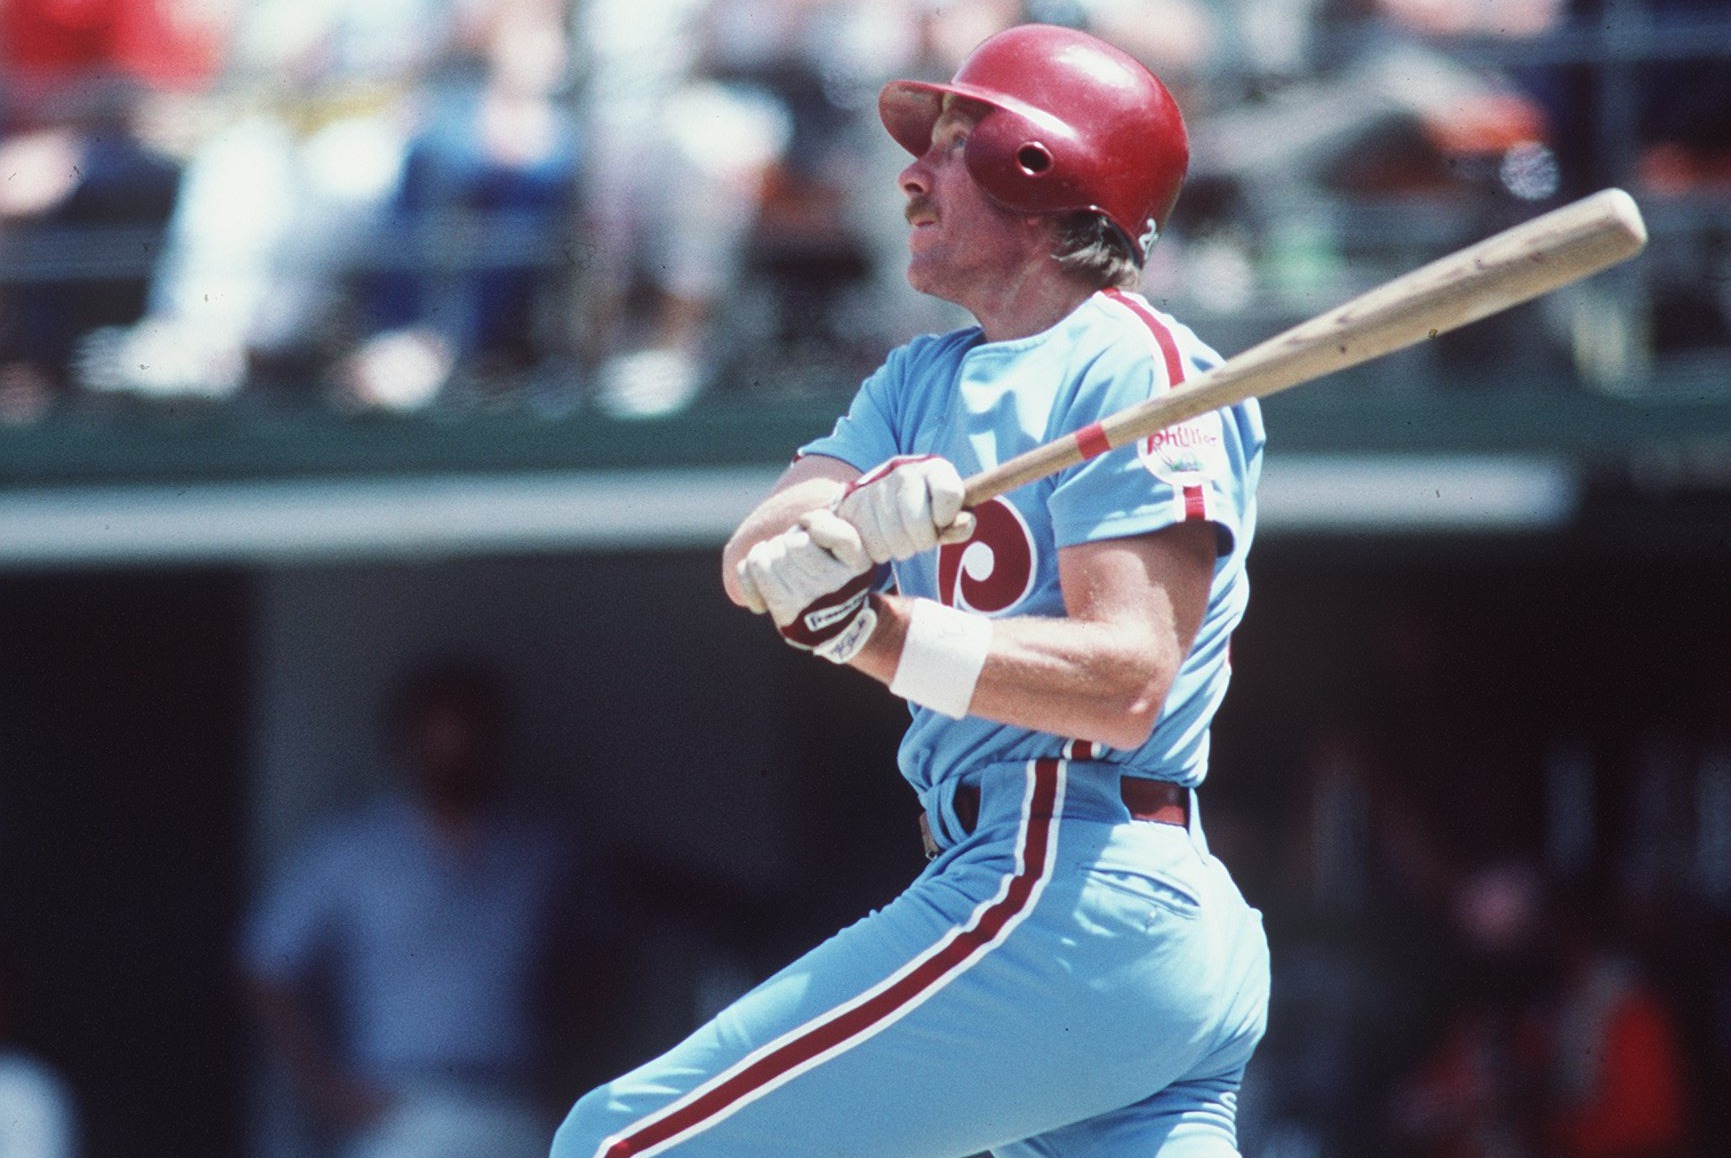 April 17, 1976: When Mike Schmidt hit four straight homers in a